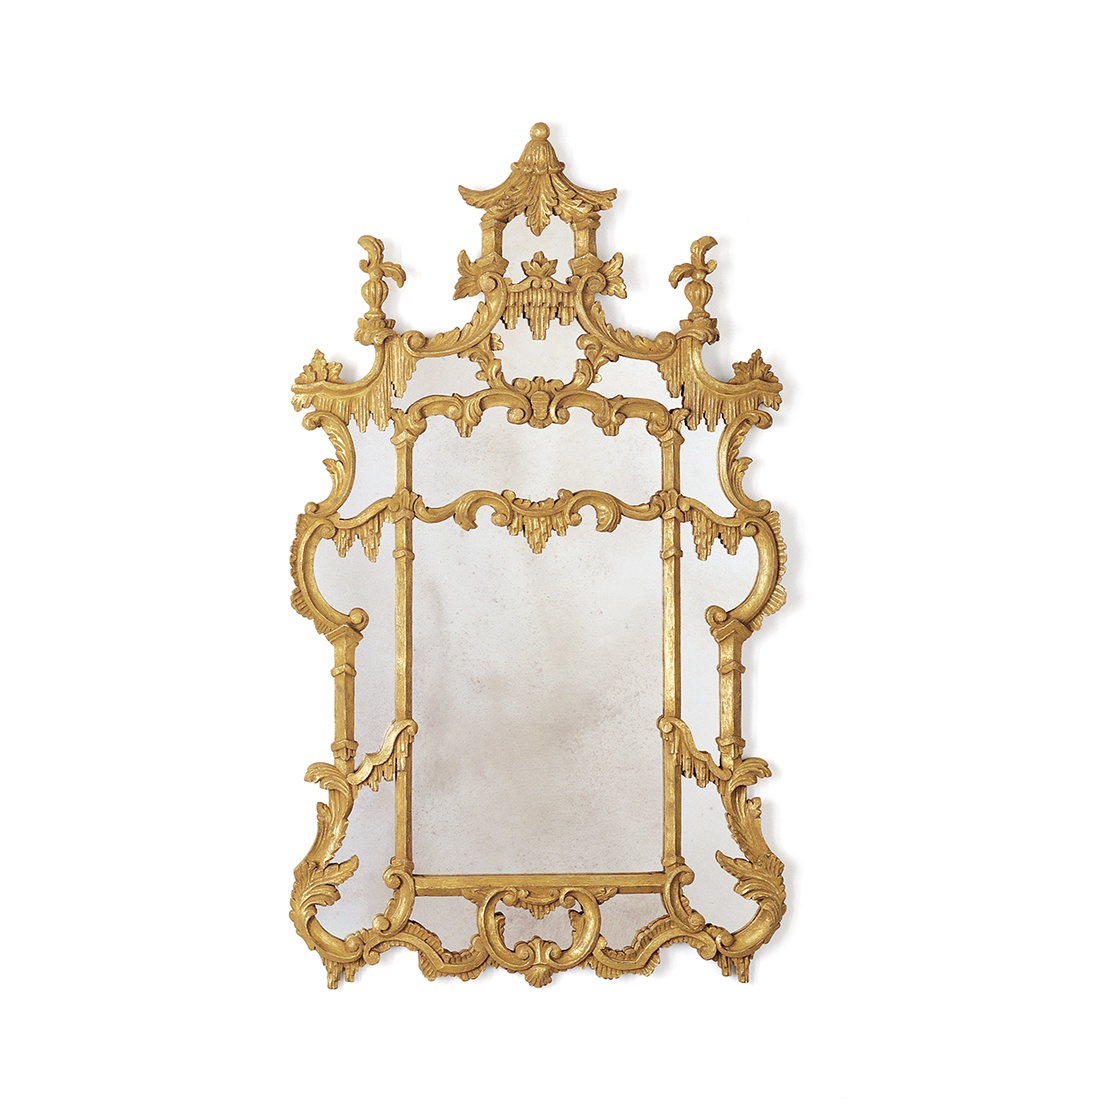 Chinoiserie mirror in Burnt gold - Beaumont & Fletcher